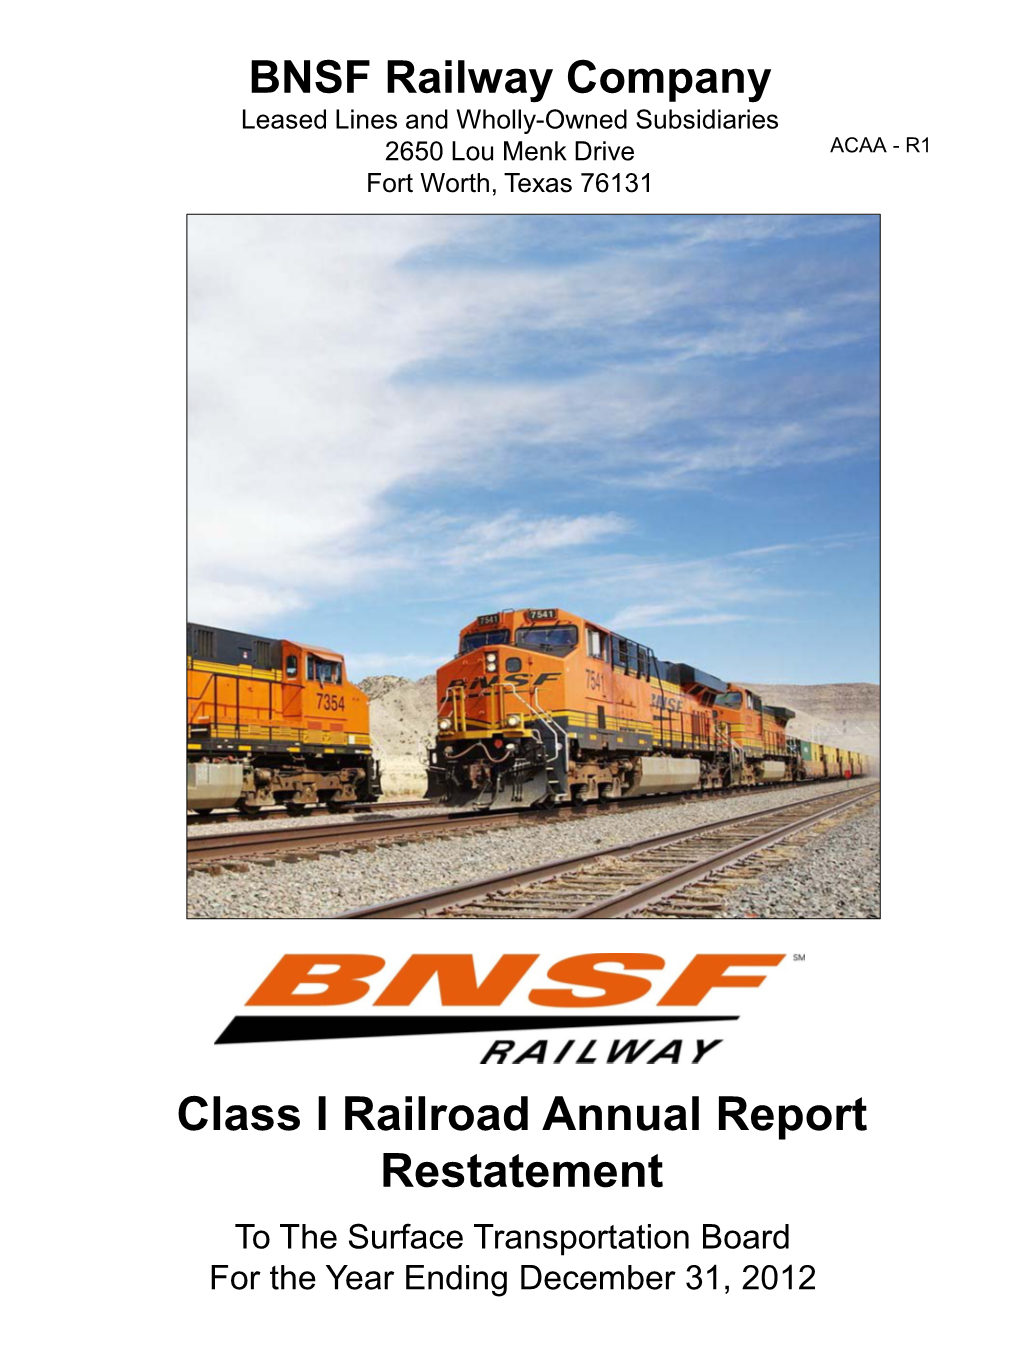 Class I Railroad Annual Report Restatement to the Surface Transportation Board for the Year Ending December 31, 2012